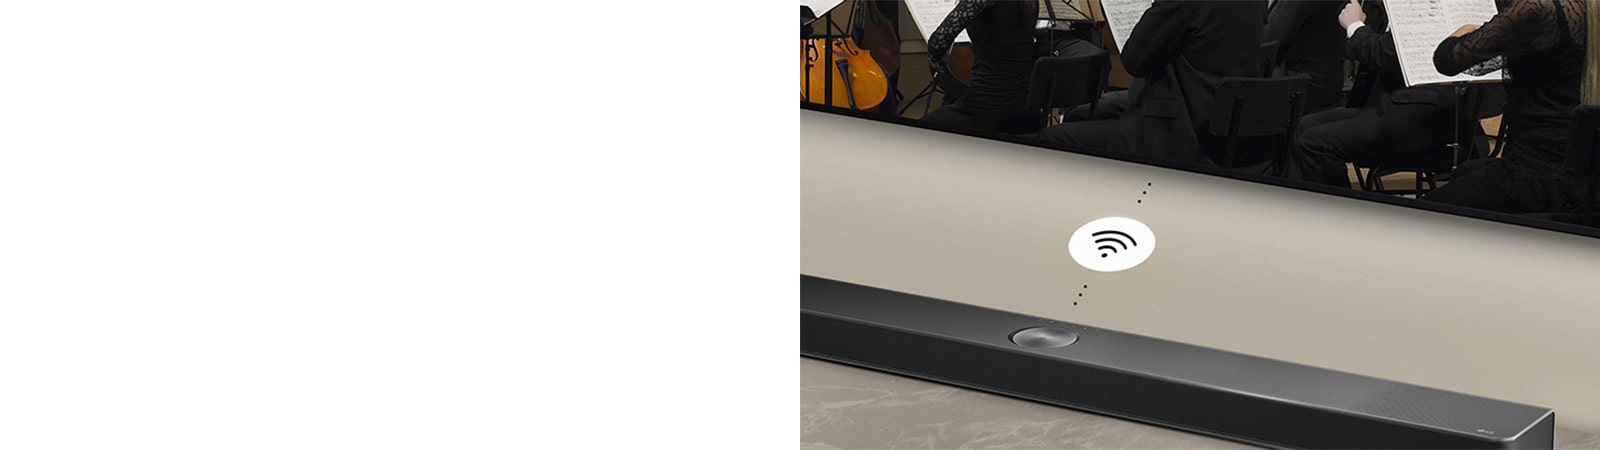 The video clip that shows LG Sound Bar SC9S can be connected to TV wirelessly is available on the right side.